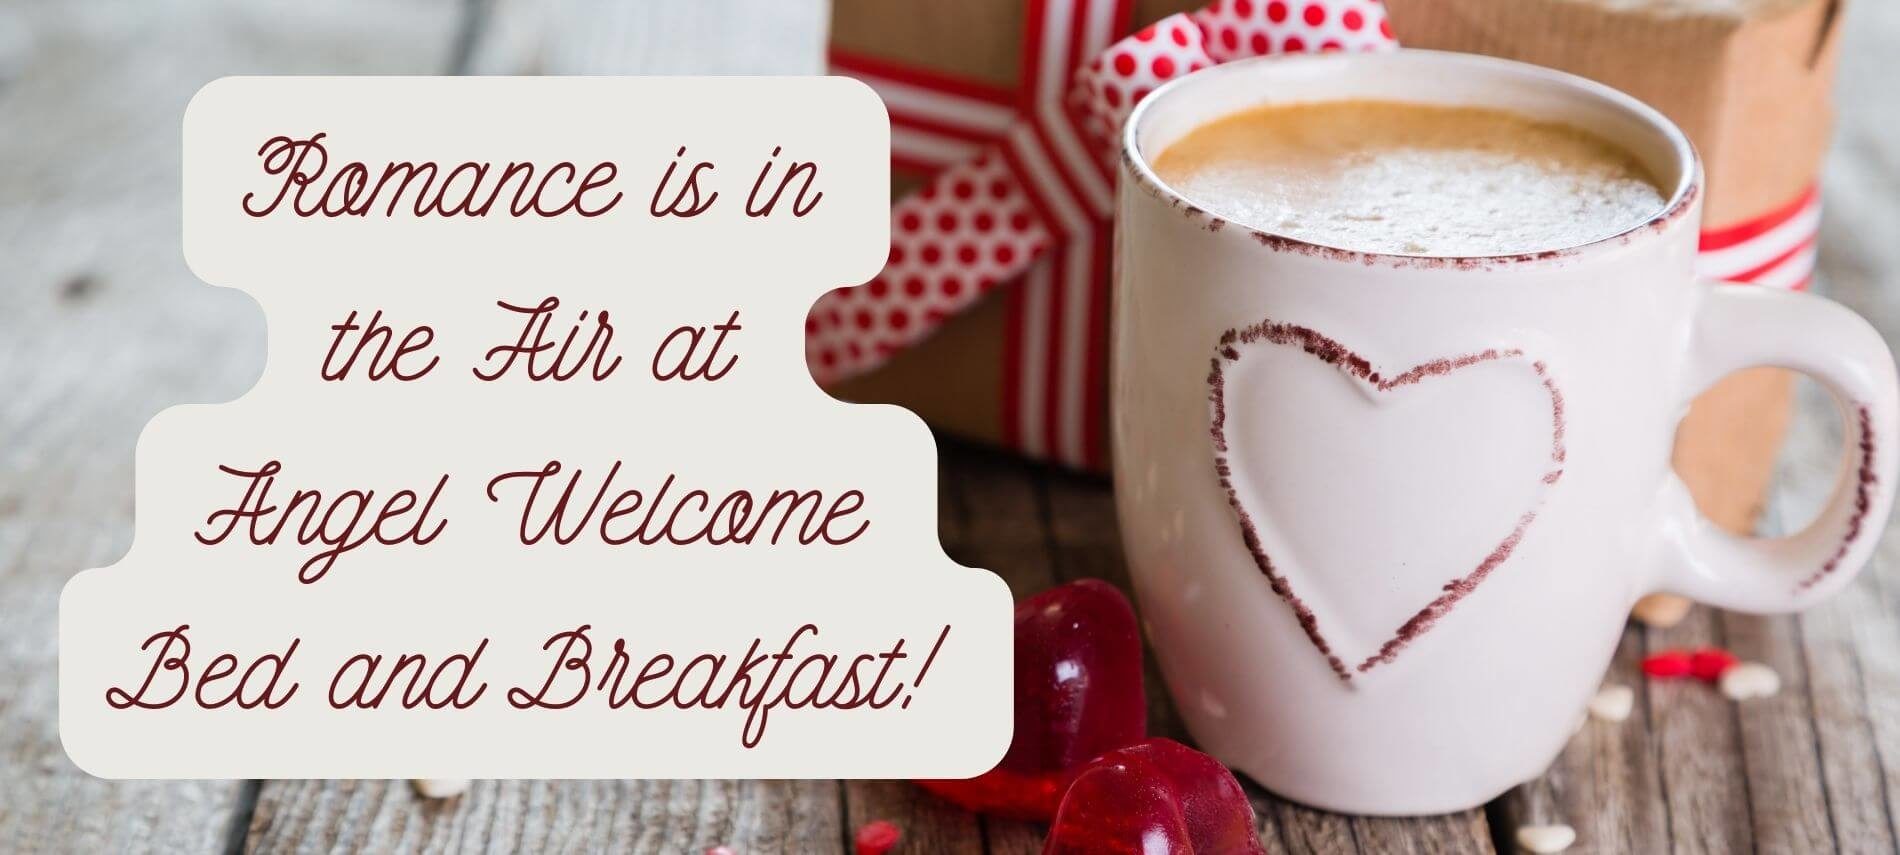 Romance is in the Air at Angel Welcome Bed and Breakfast! on wooden background with a hot cocoa mug, small gift and heart decorations